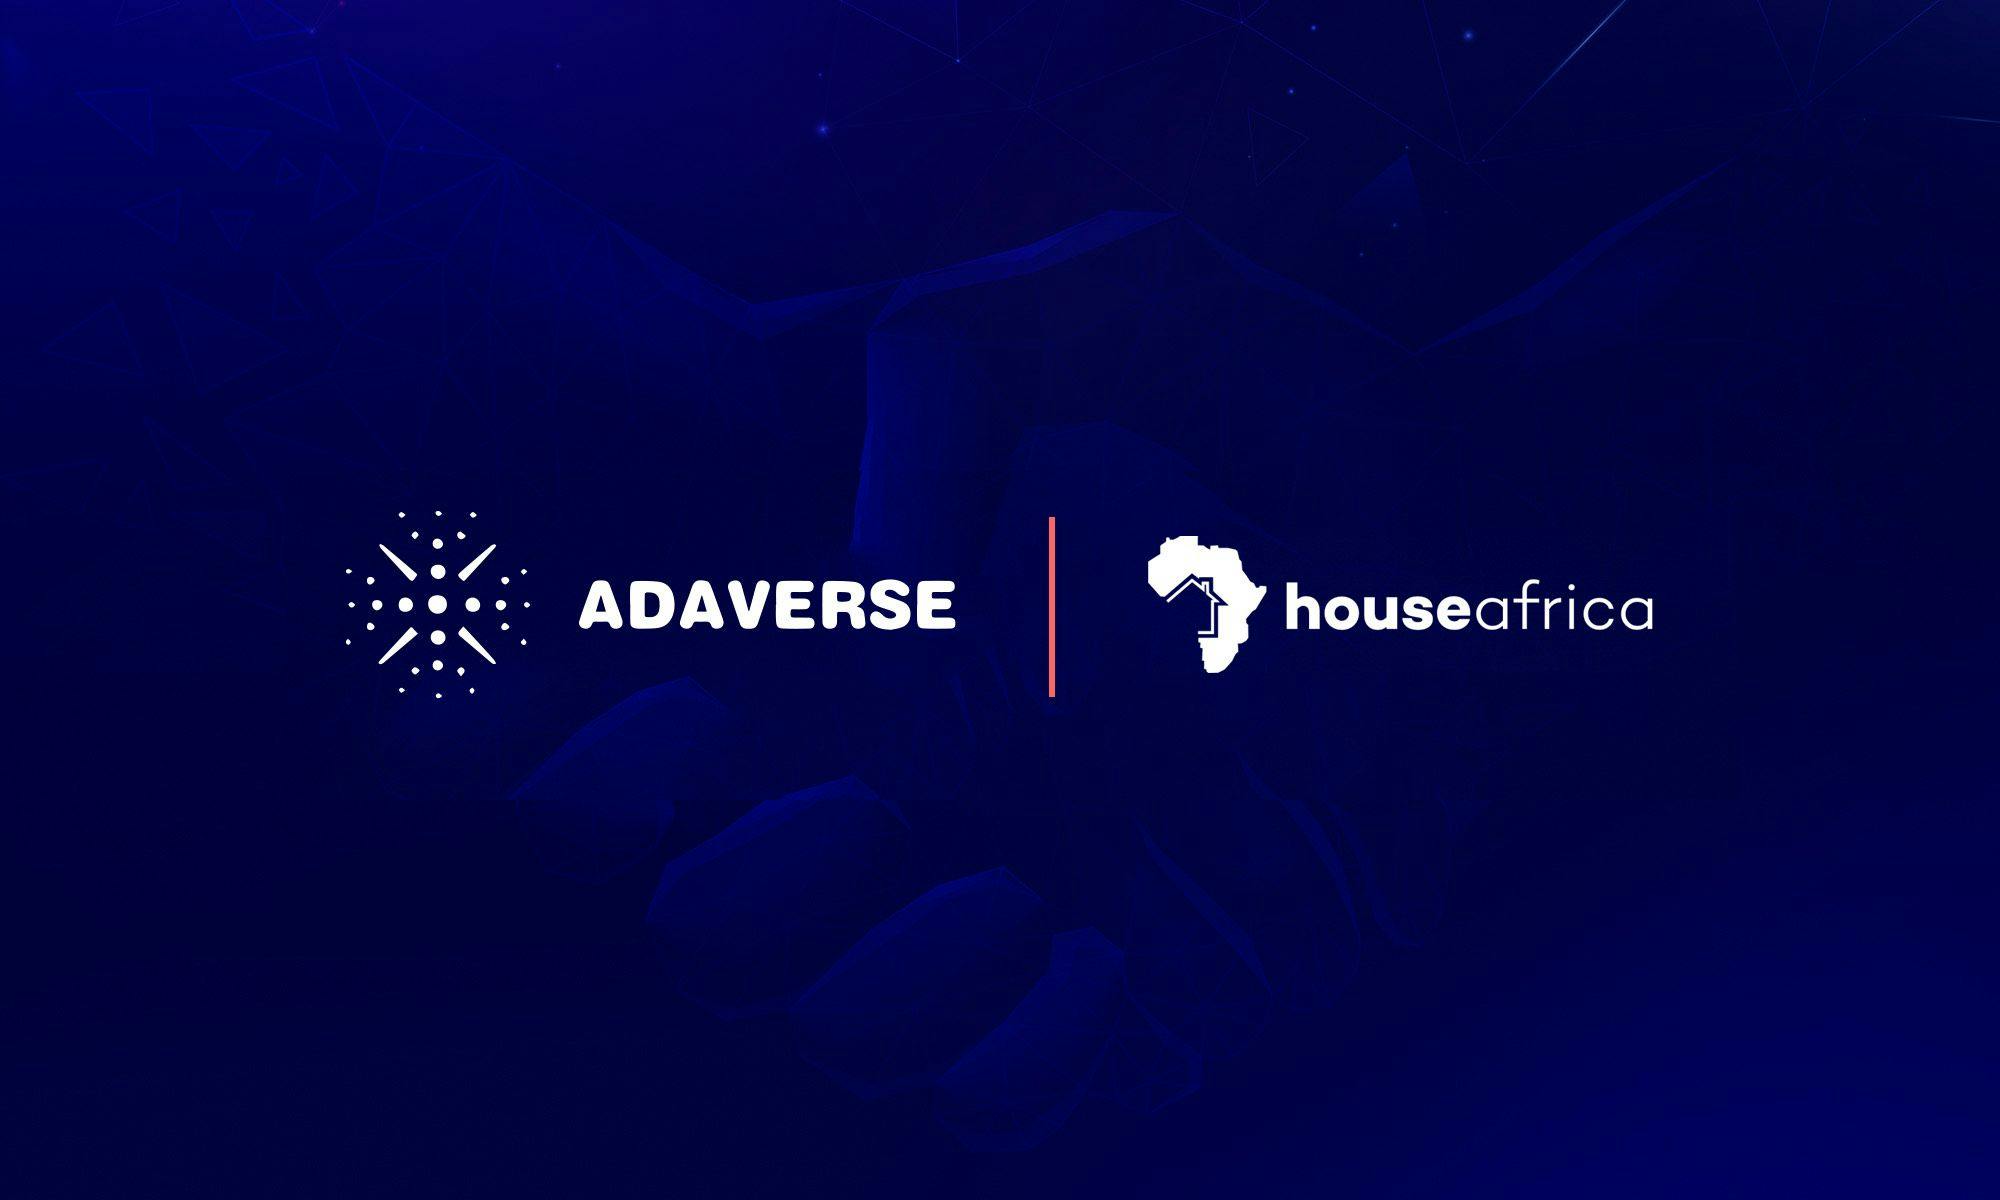 EMURGO Africa’s Adaverse Invests in HouseAfrica to Transform Land Ownership Processing in Africa with Cardano Blockchain